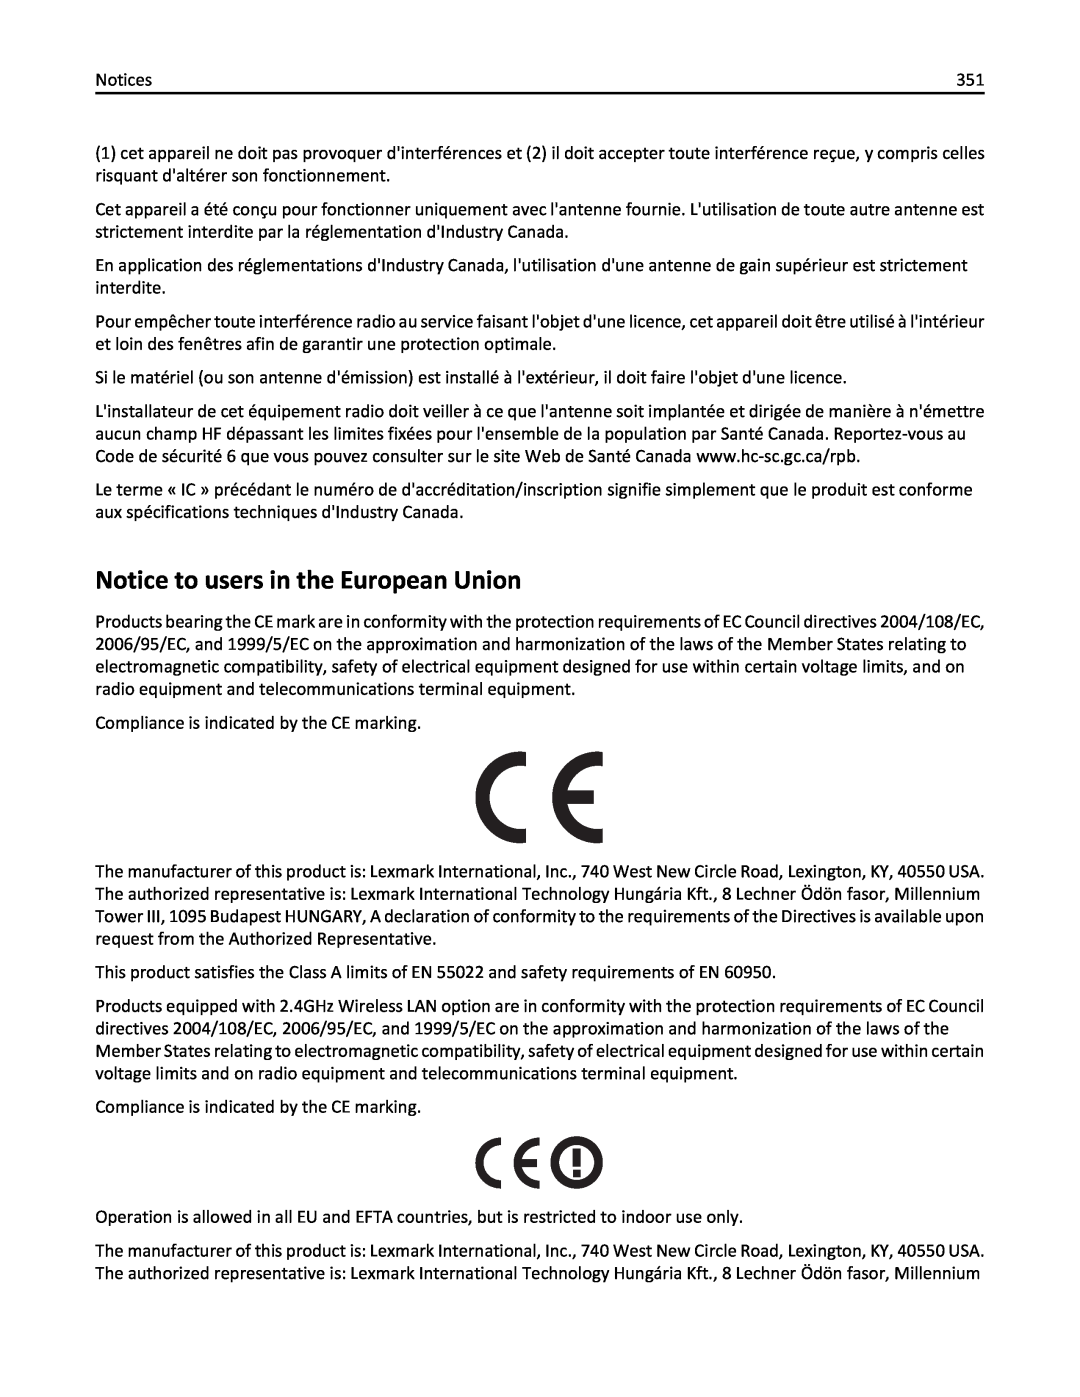 Lexmark MX710DHE, 24T7310, 237, 037 manual Notice to users in the European Union 